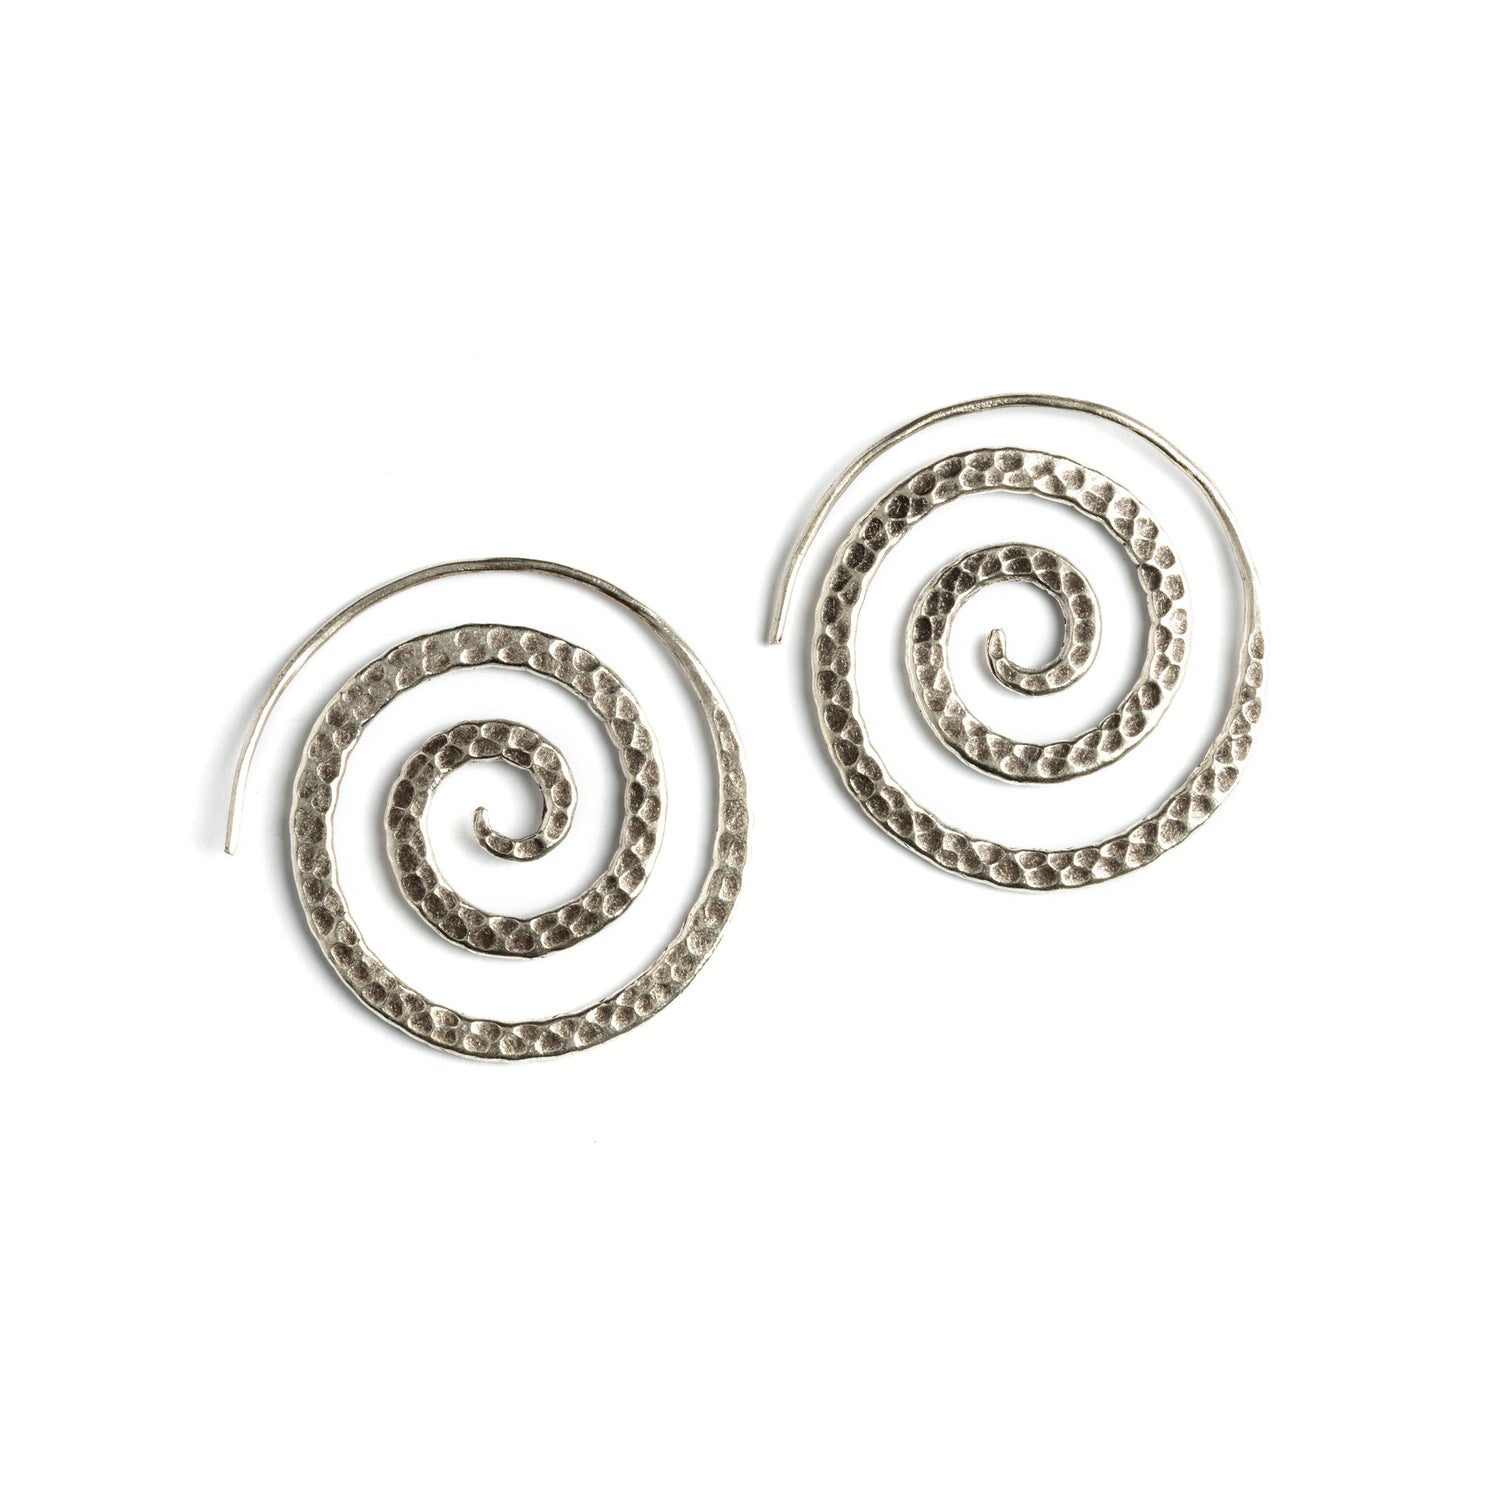 Hammered Spiral Tribal Silver Earrings frontal view